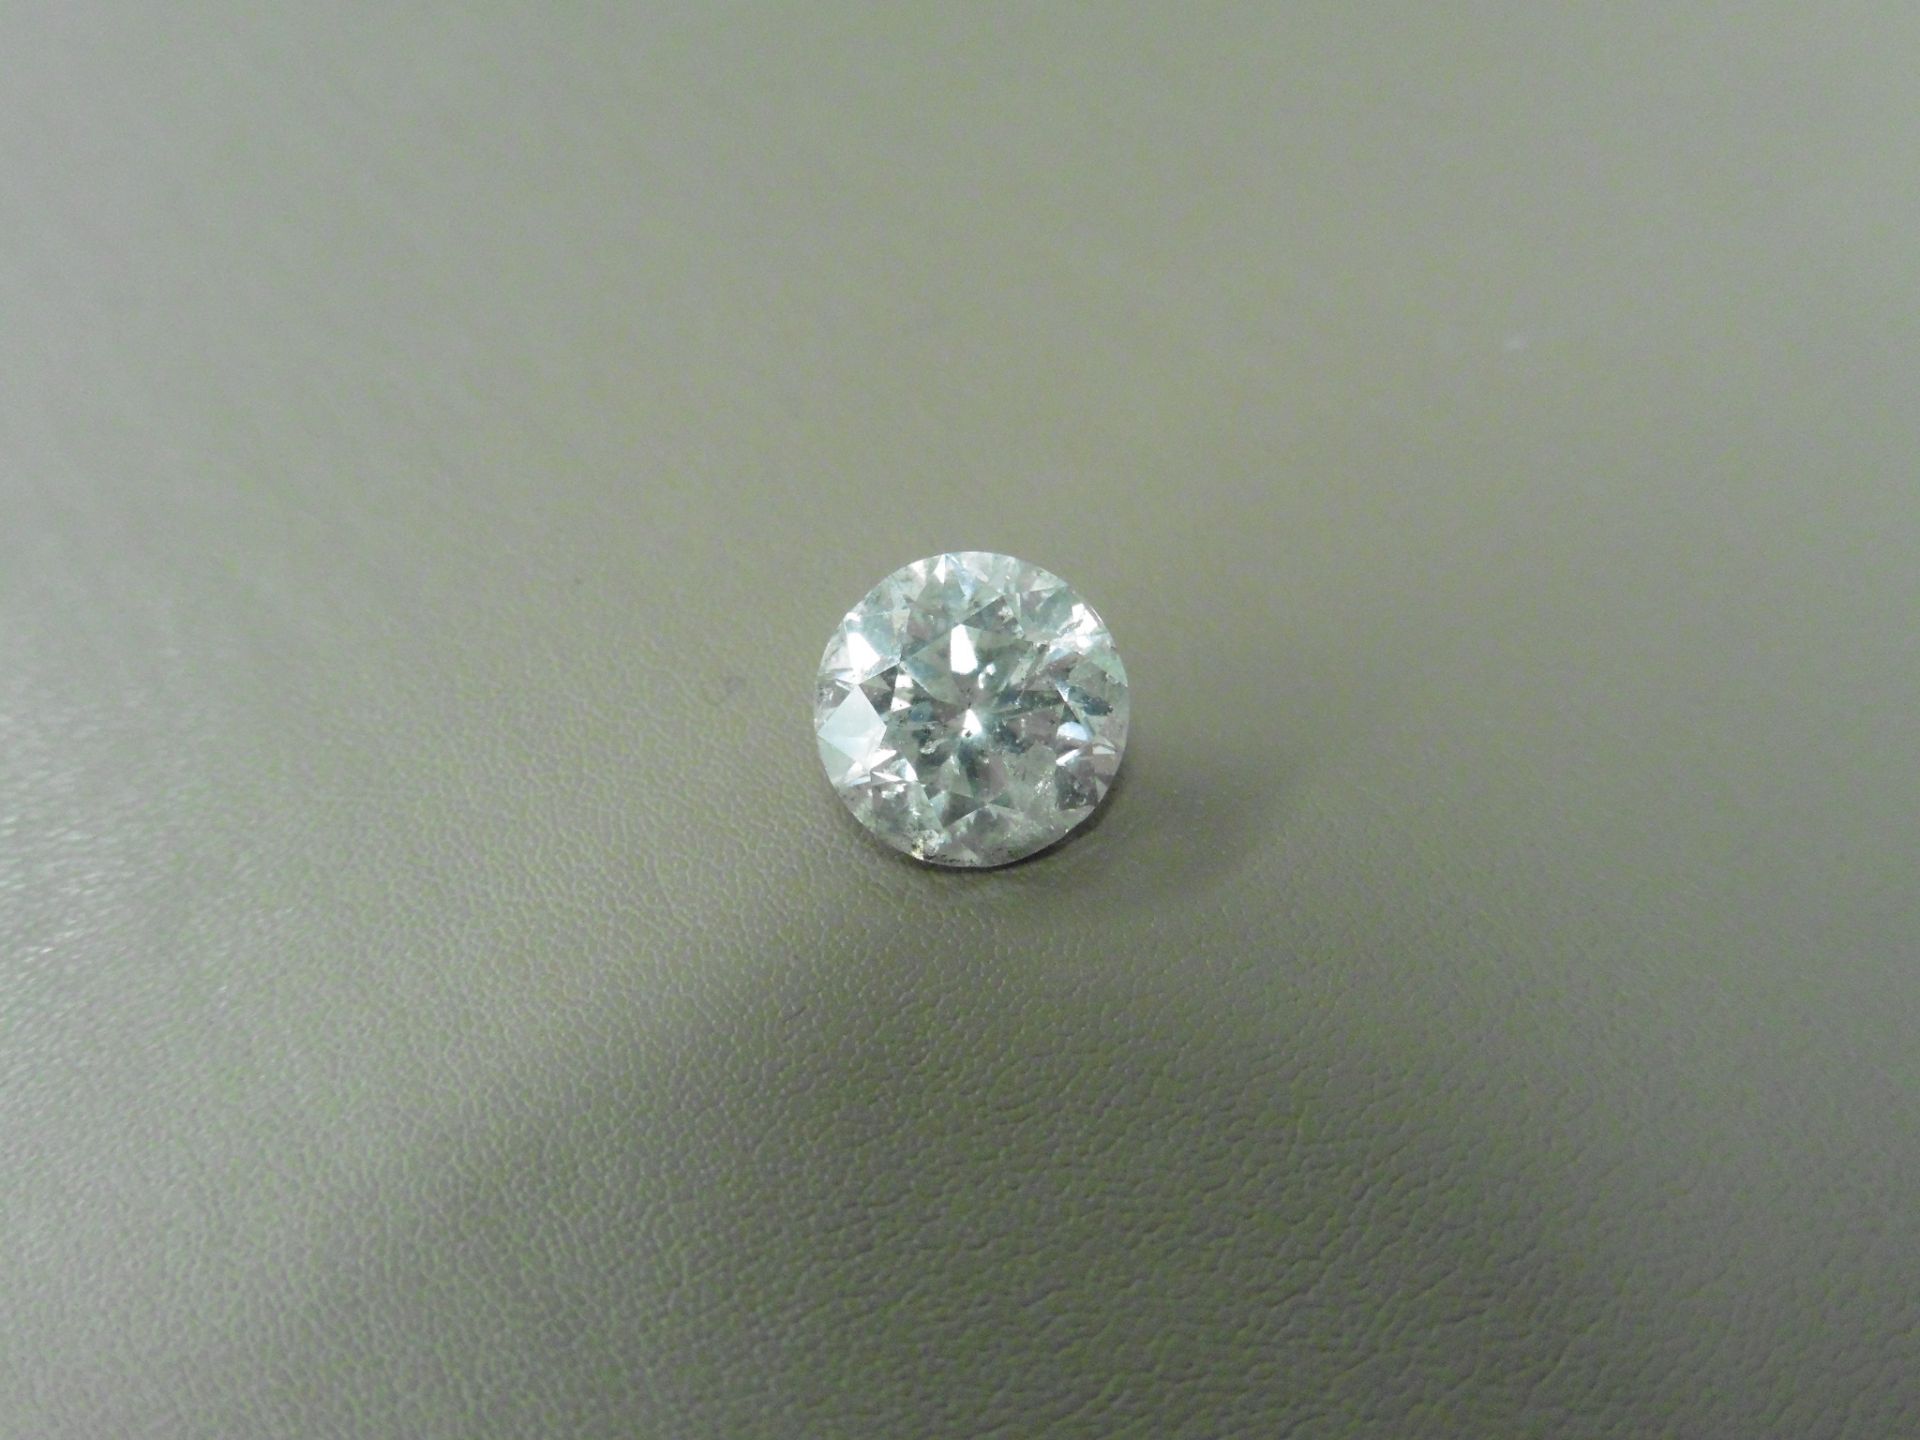 4.13ct natural loose brilliant cut diamond. G colour and I1 clarity. Natural stone. No certification - Image 3 of 5